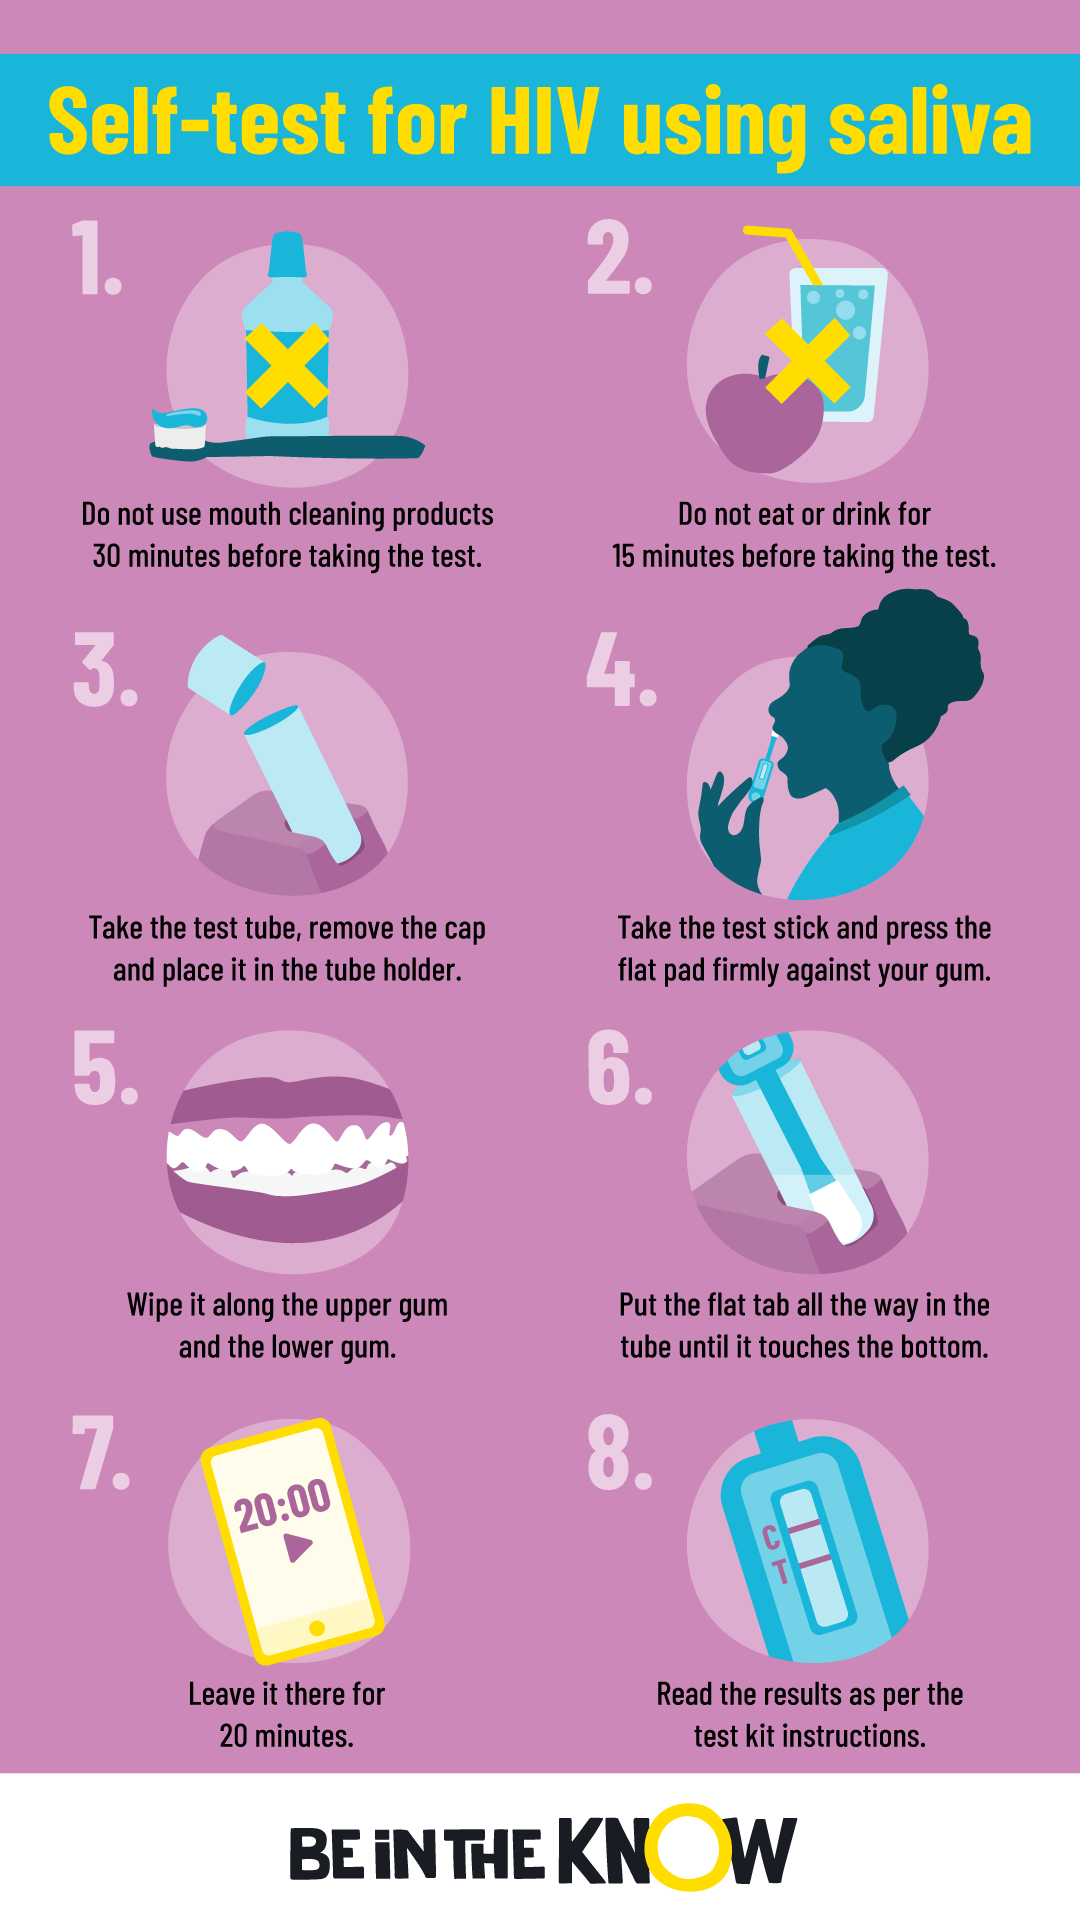 Step by step instructions for self-testing your saliva for HIV